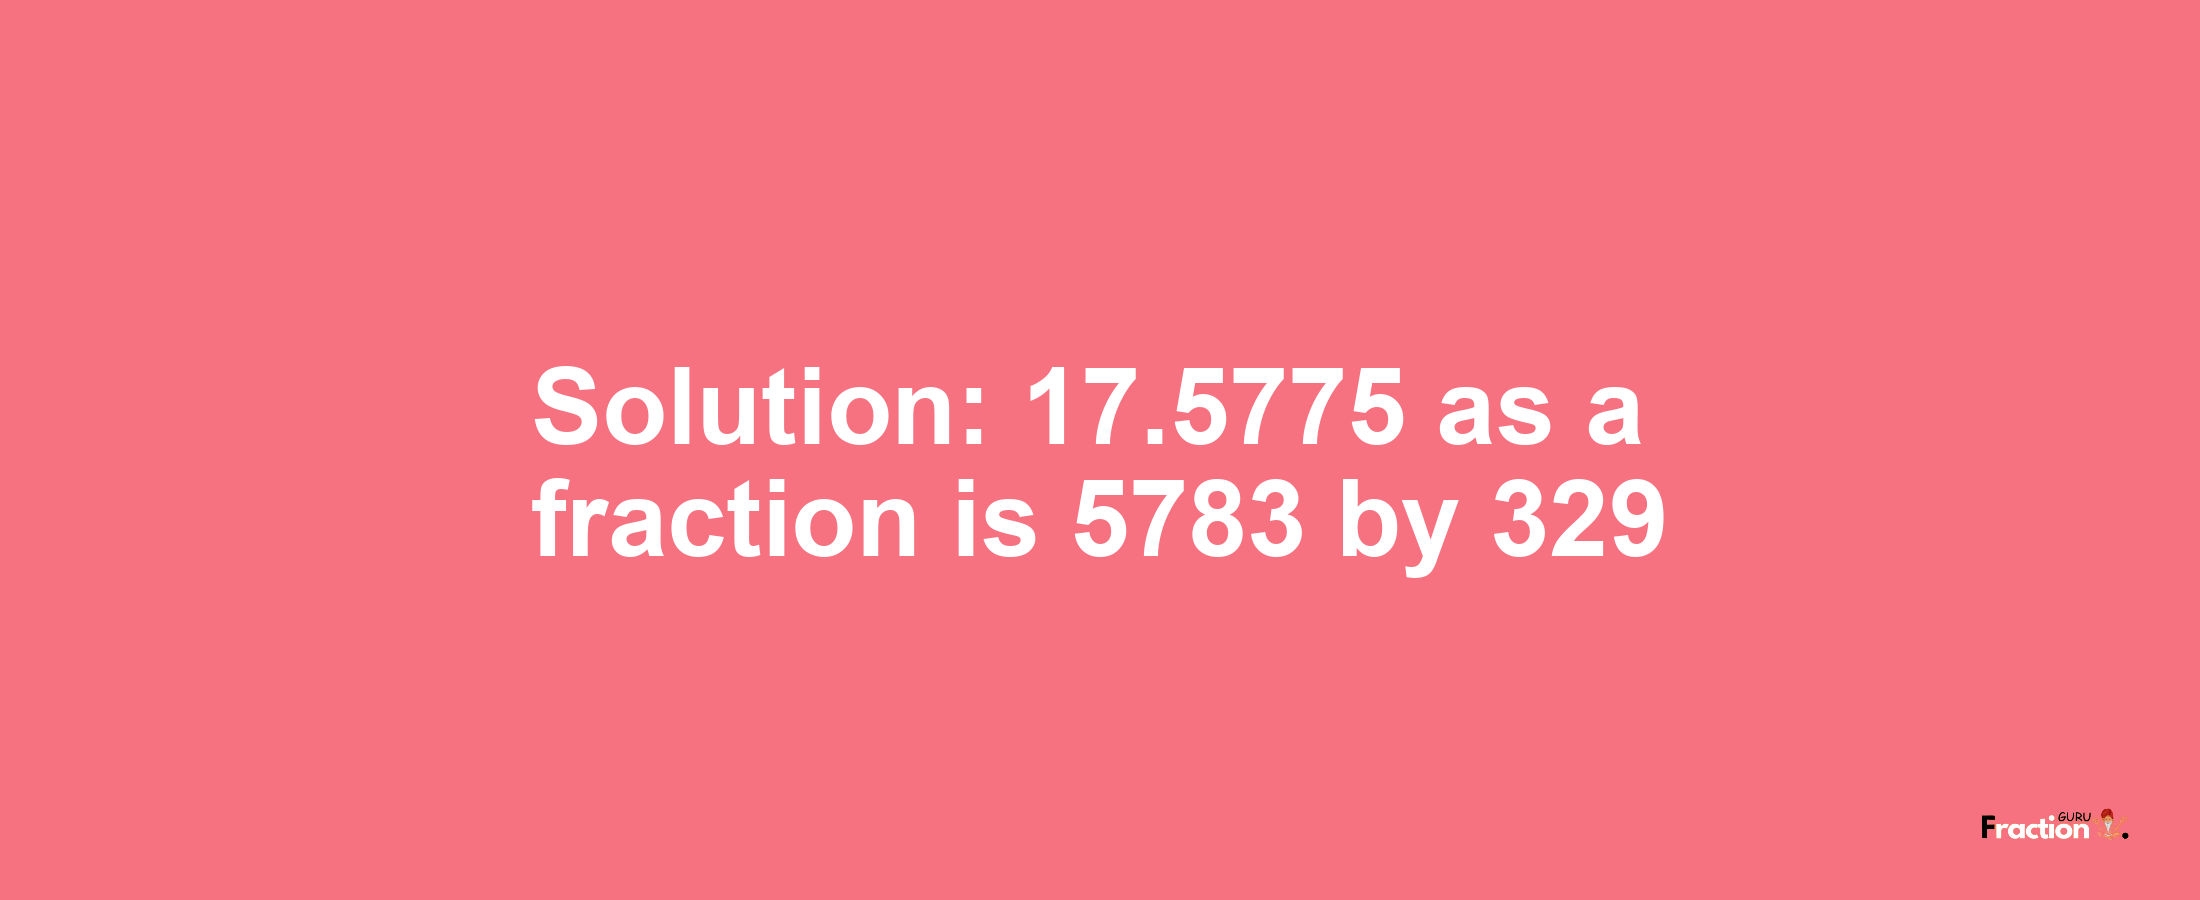 Solution:17.5775 as a fraction is 5783/329